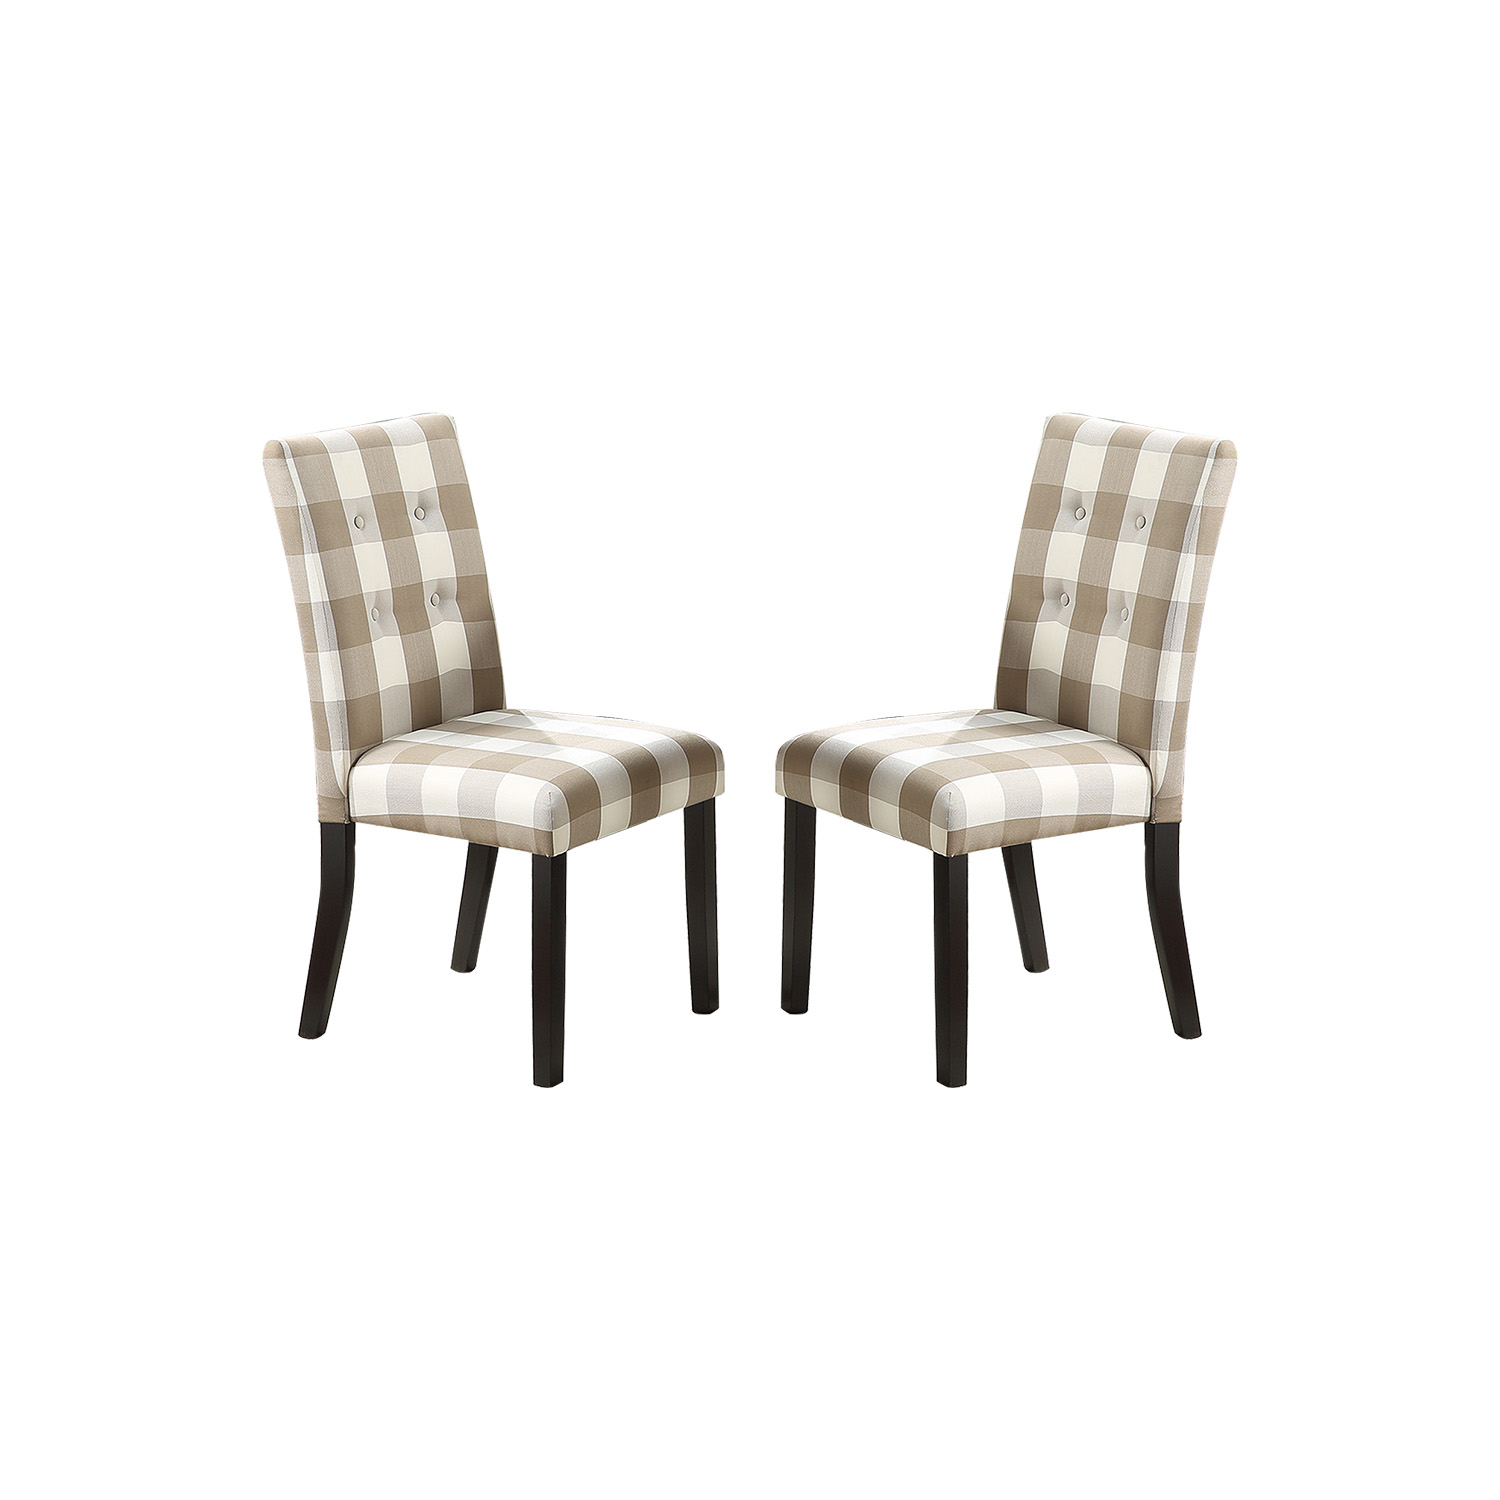 Beige Grid Patterned Fabric Upholstered Side Chairs, Black (Set of 2)-CASAINC